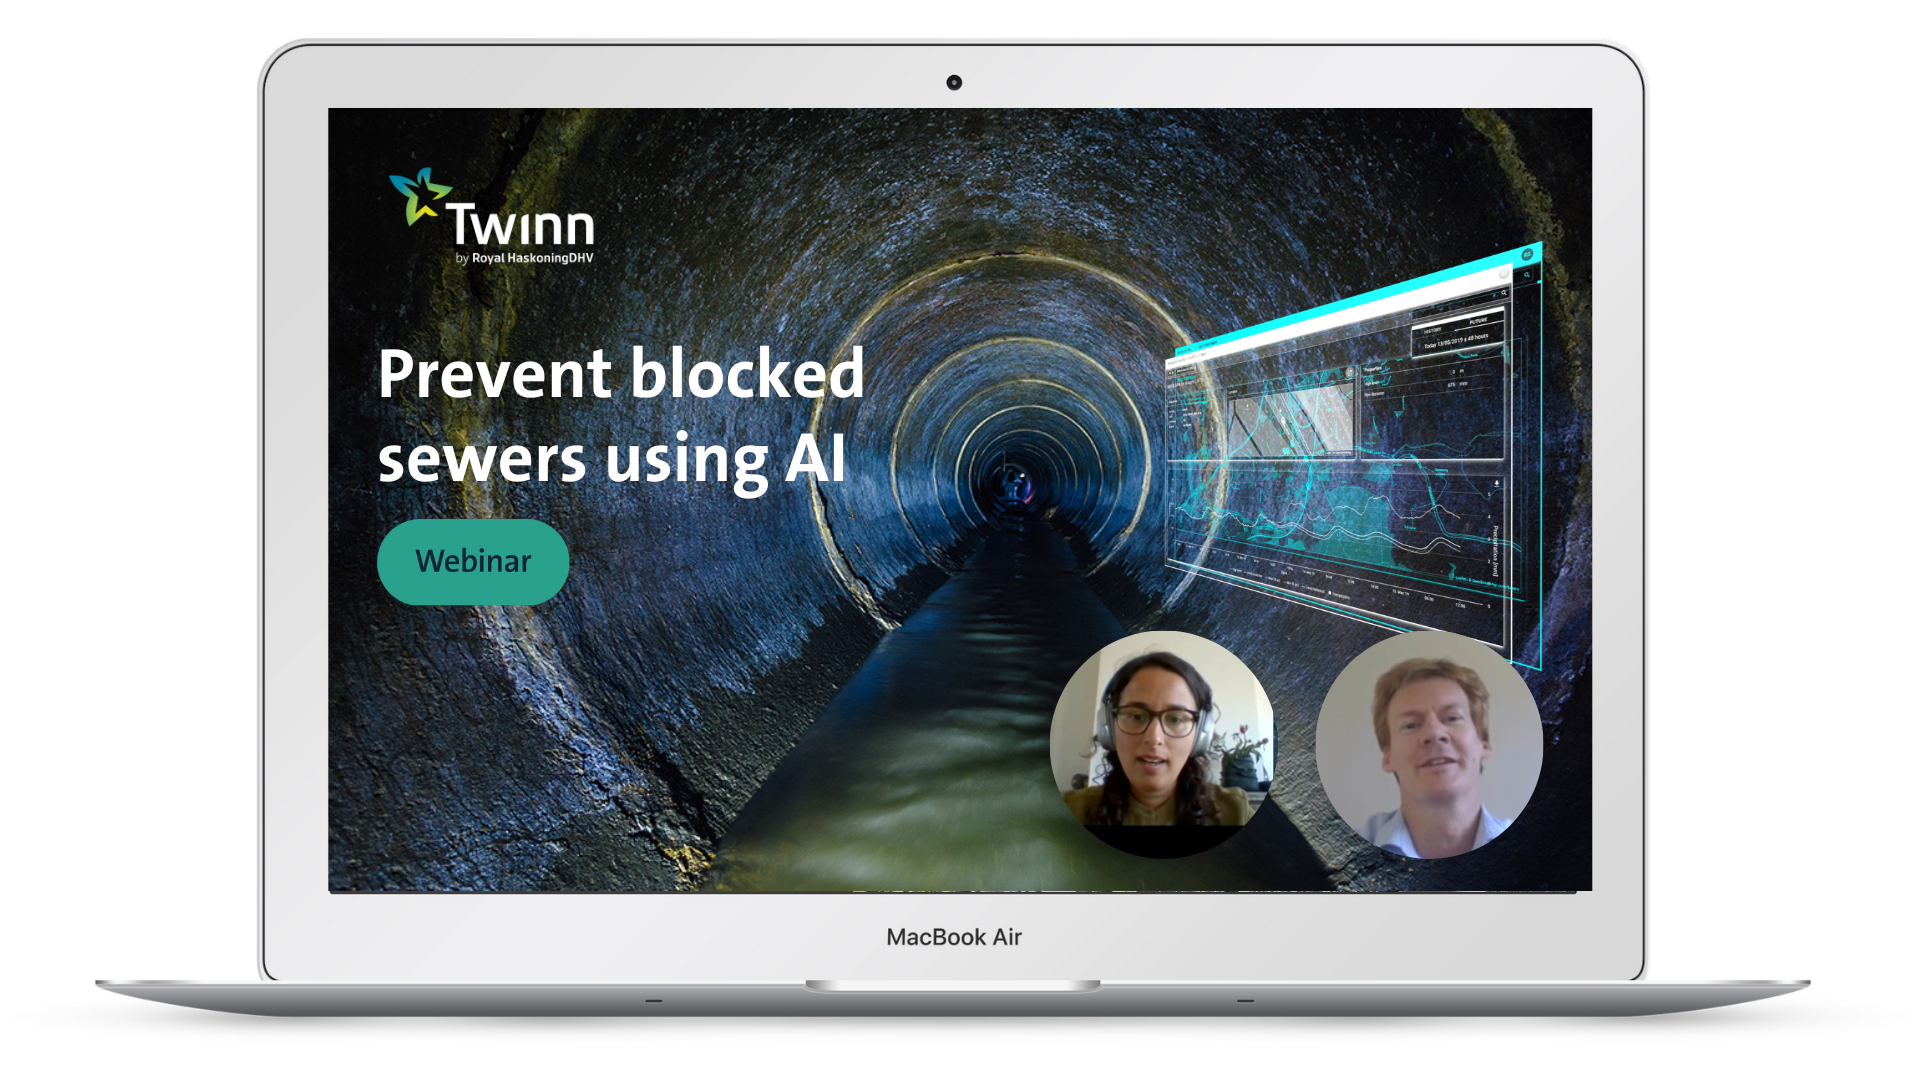 Webinar on preventing blocked sewers using AI